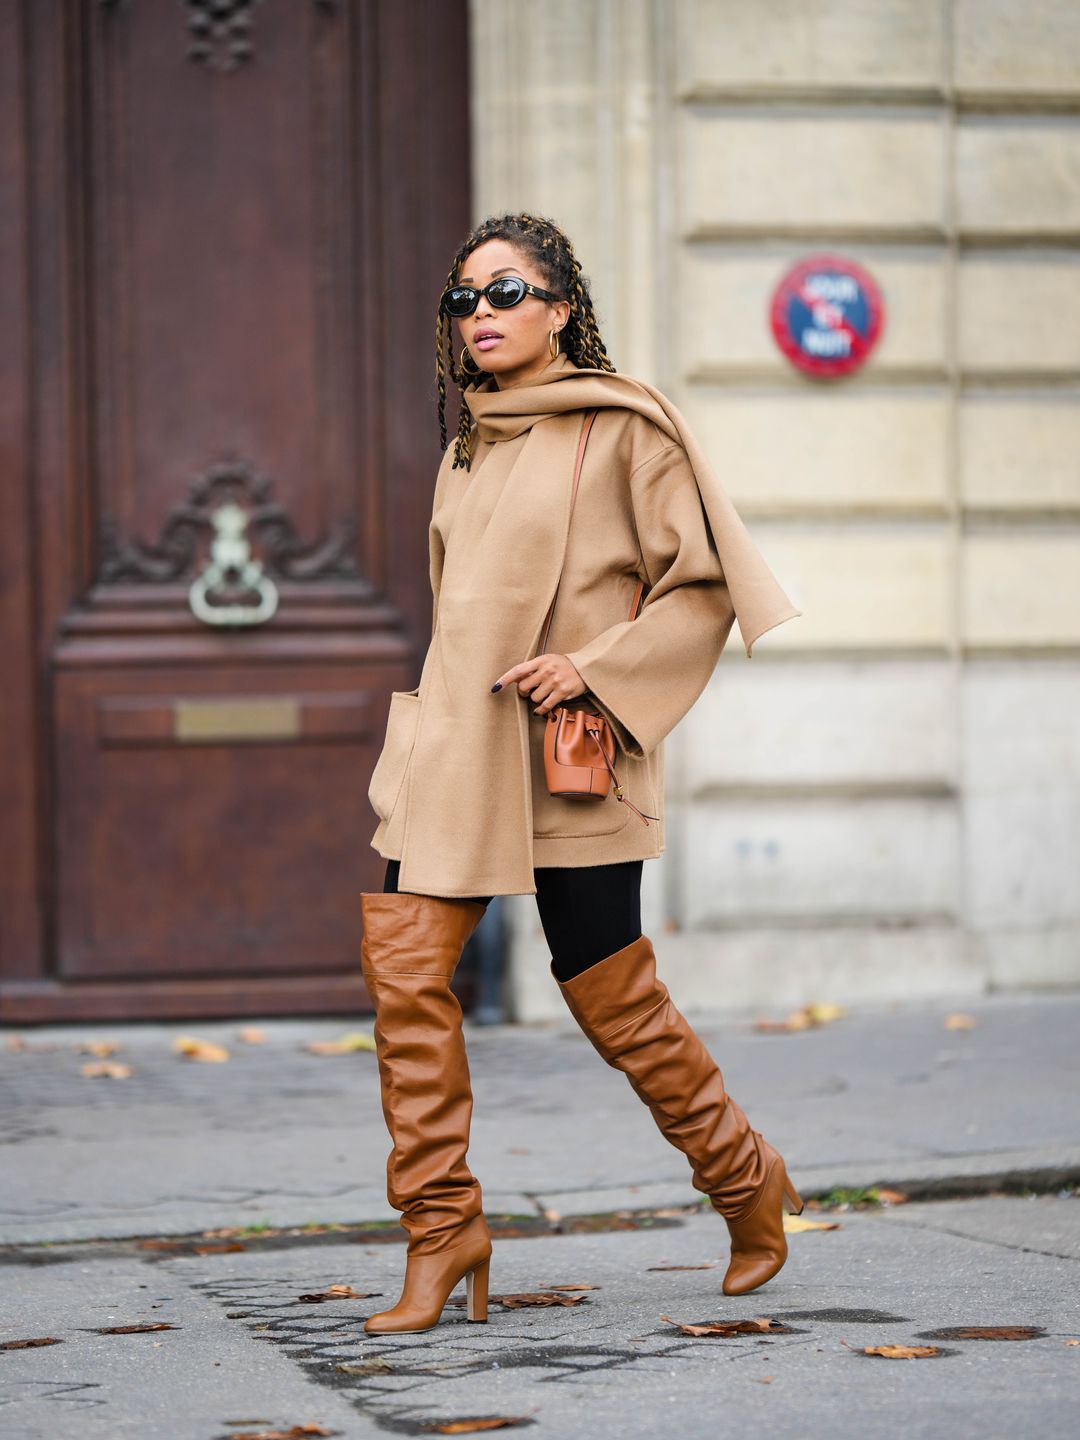 Ellie Delphine wears a camel coat with black leggings and tan thigh-high boots 